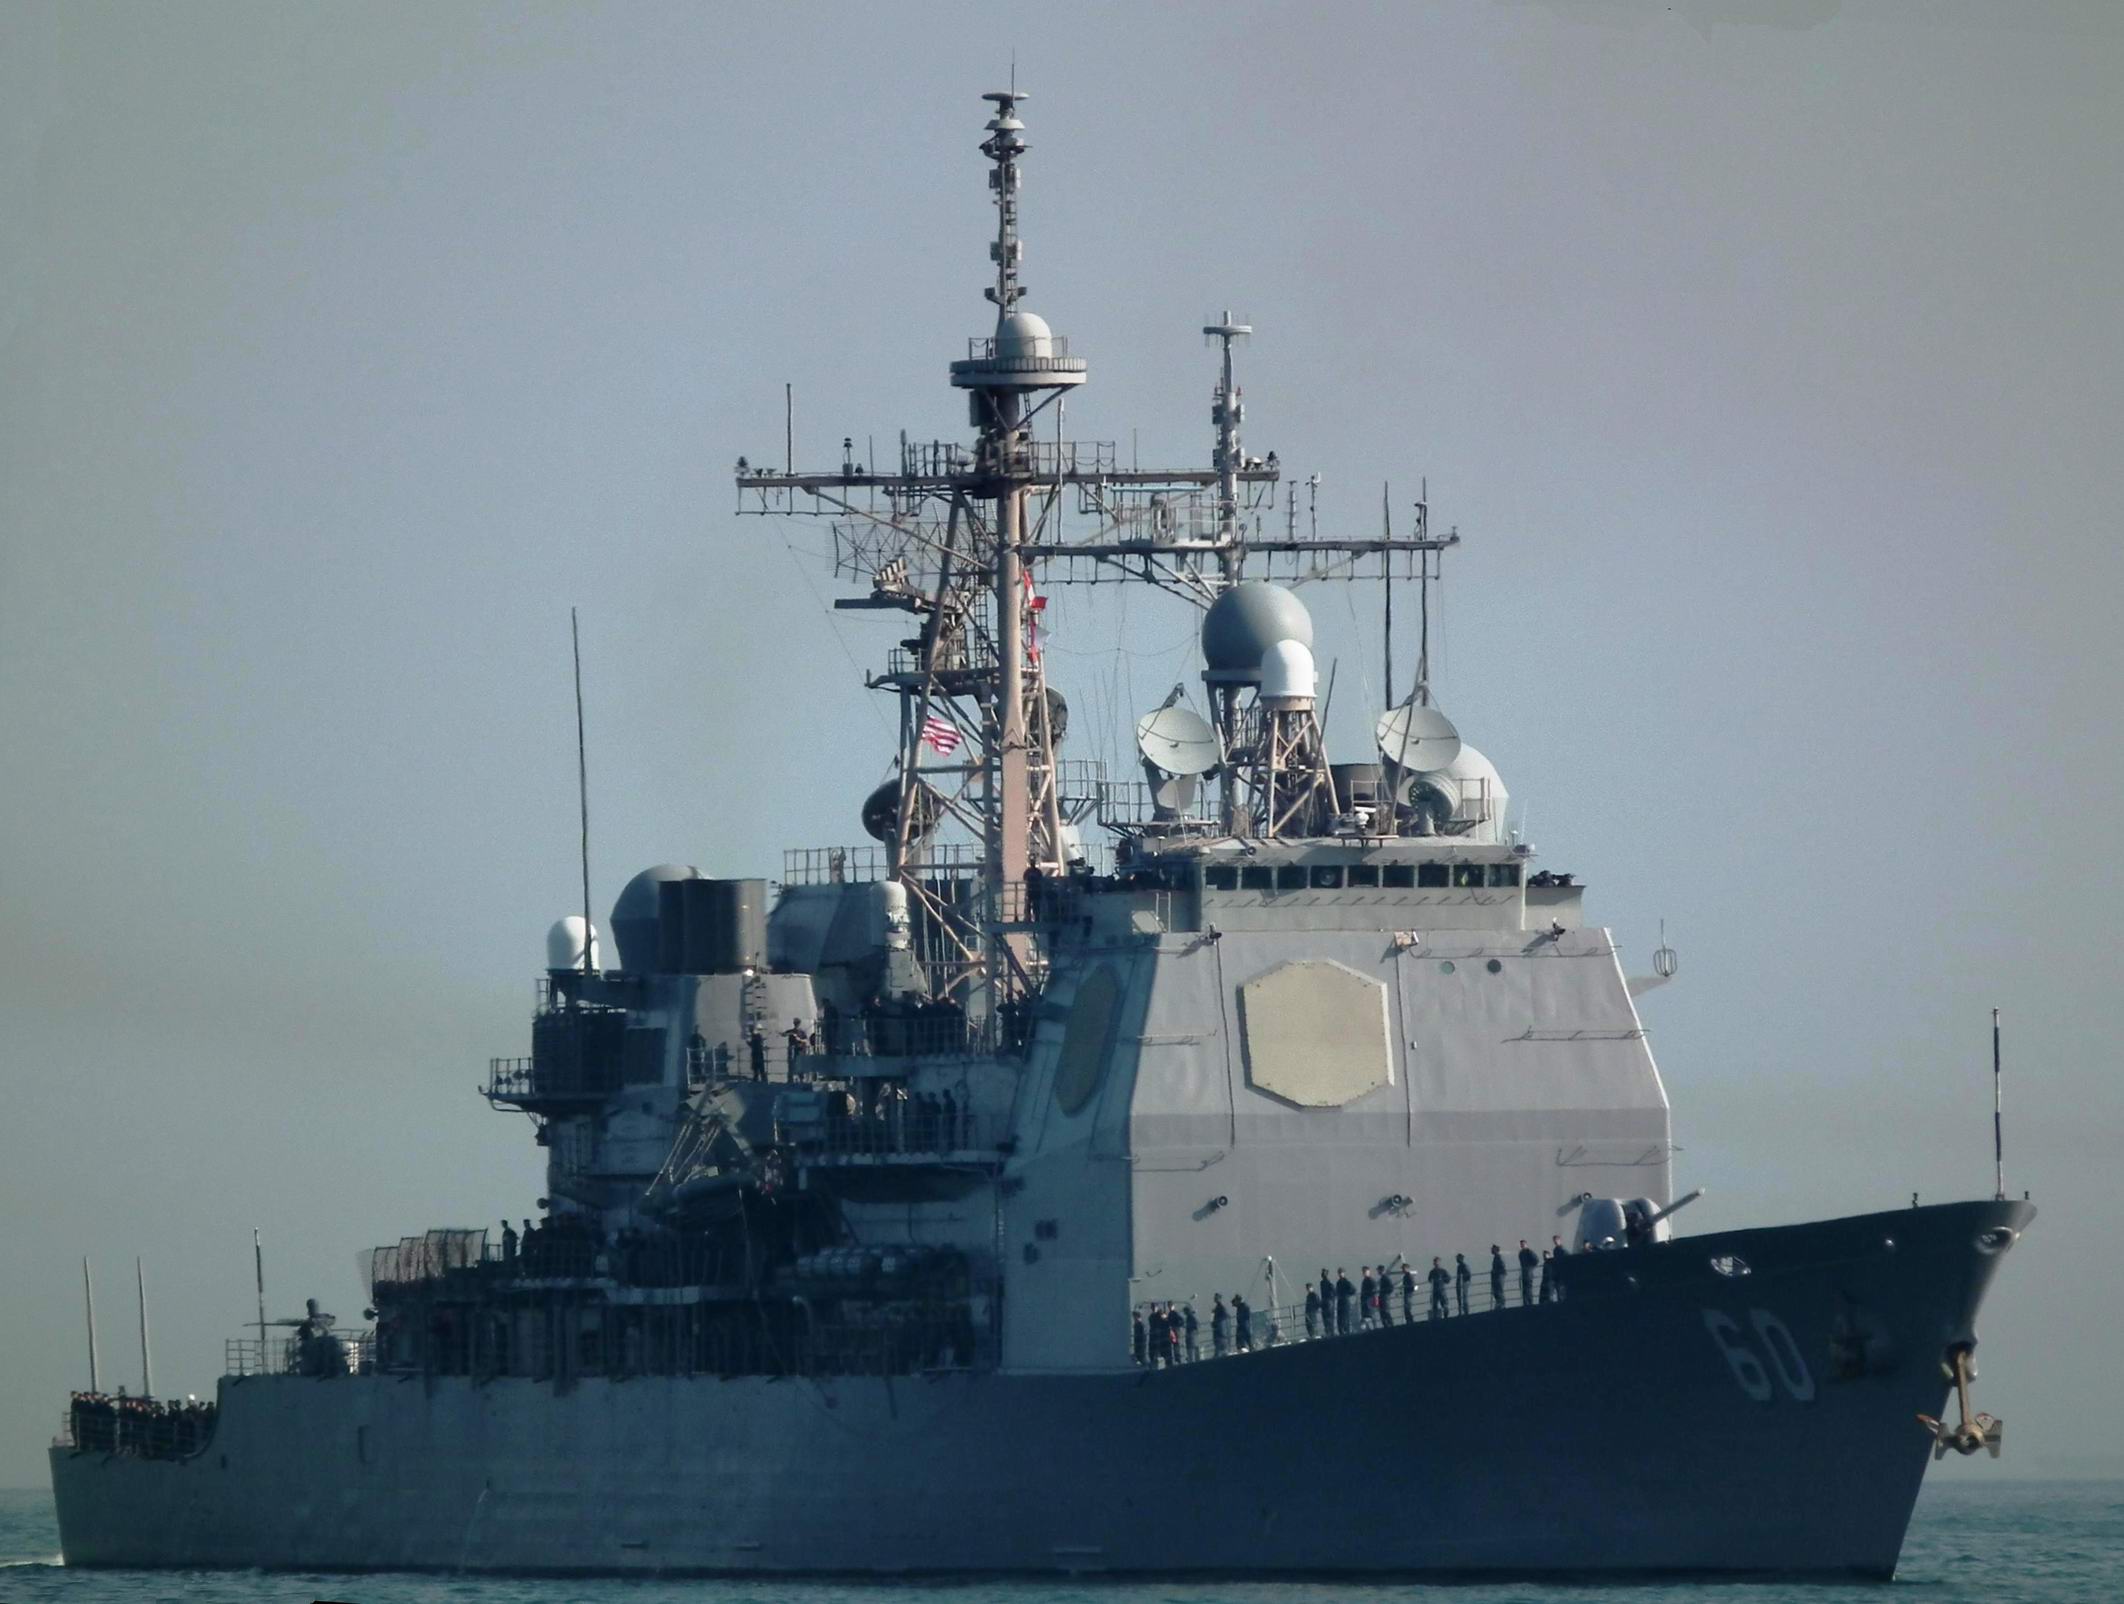 USS Normandy Portsmouth May 27 2012 - 3.jpg